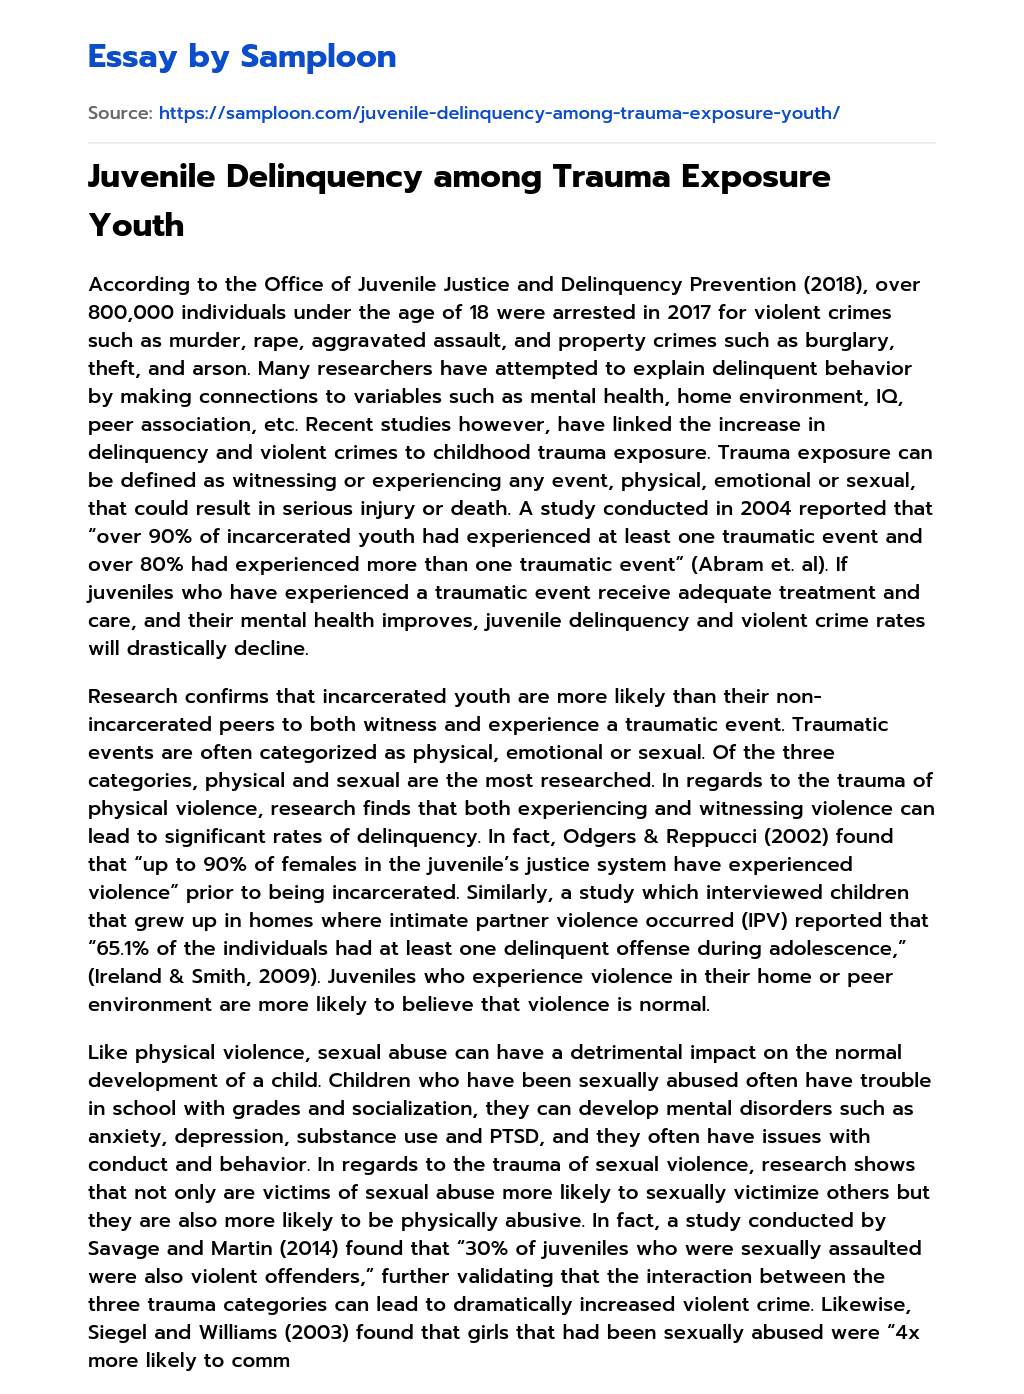 Juvenile Delinquency among Trauma Exposure Youth essay